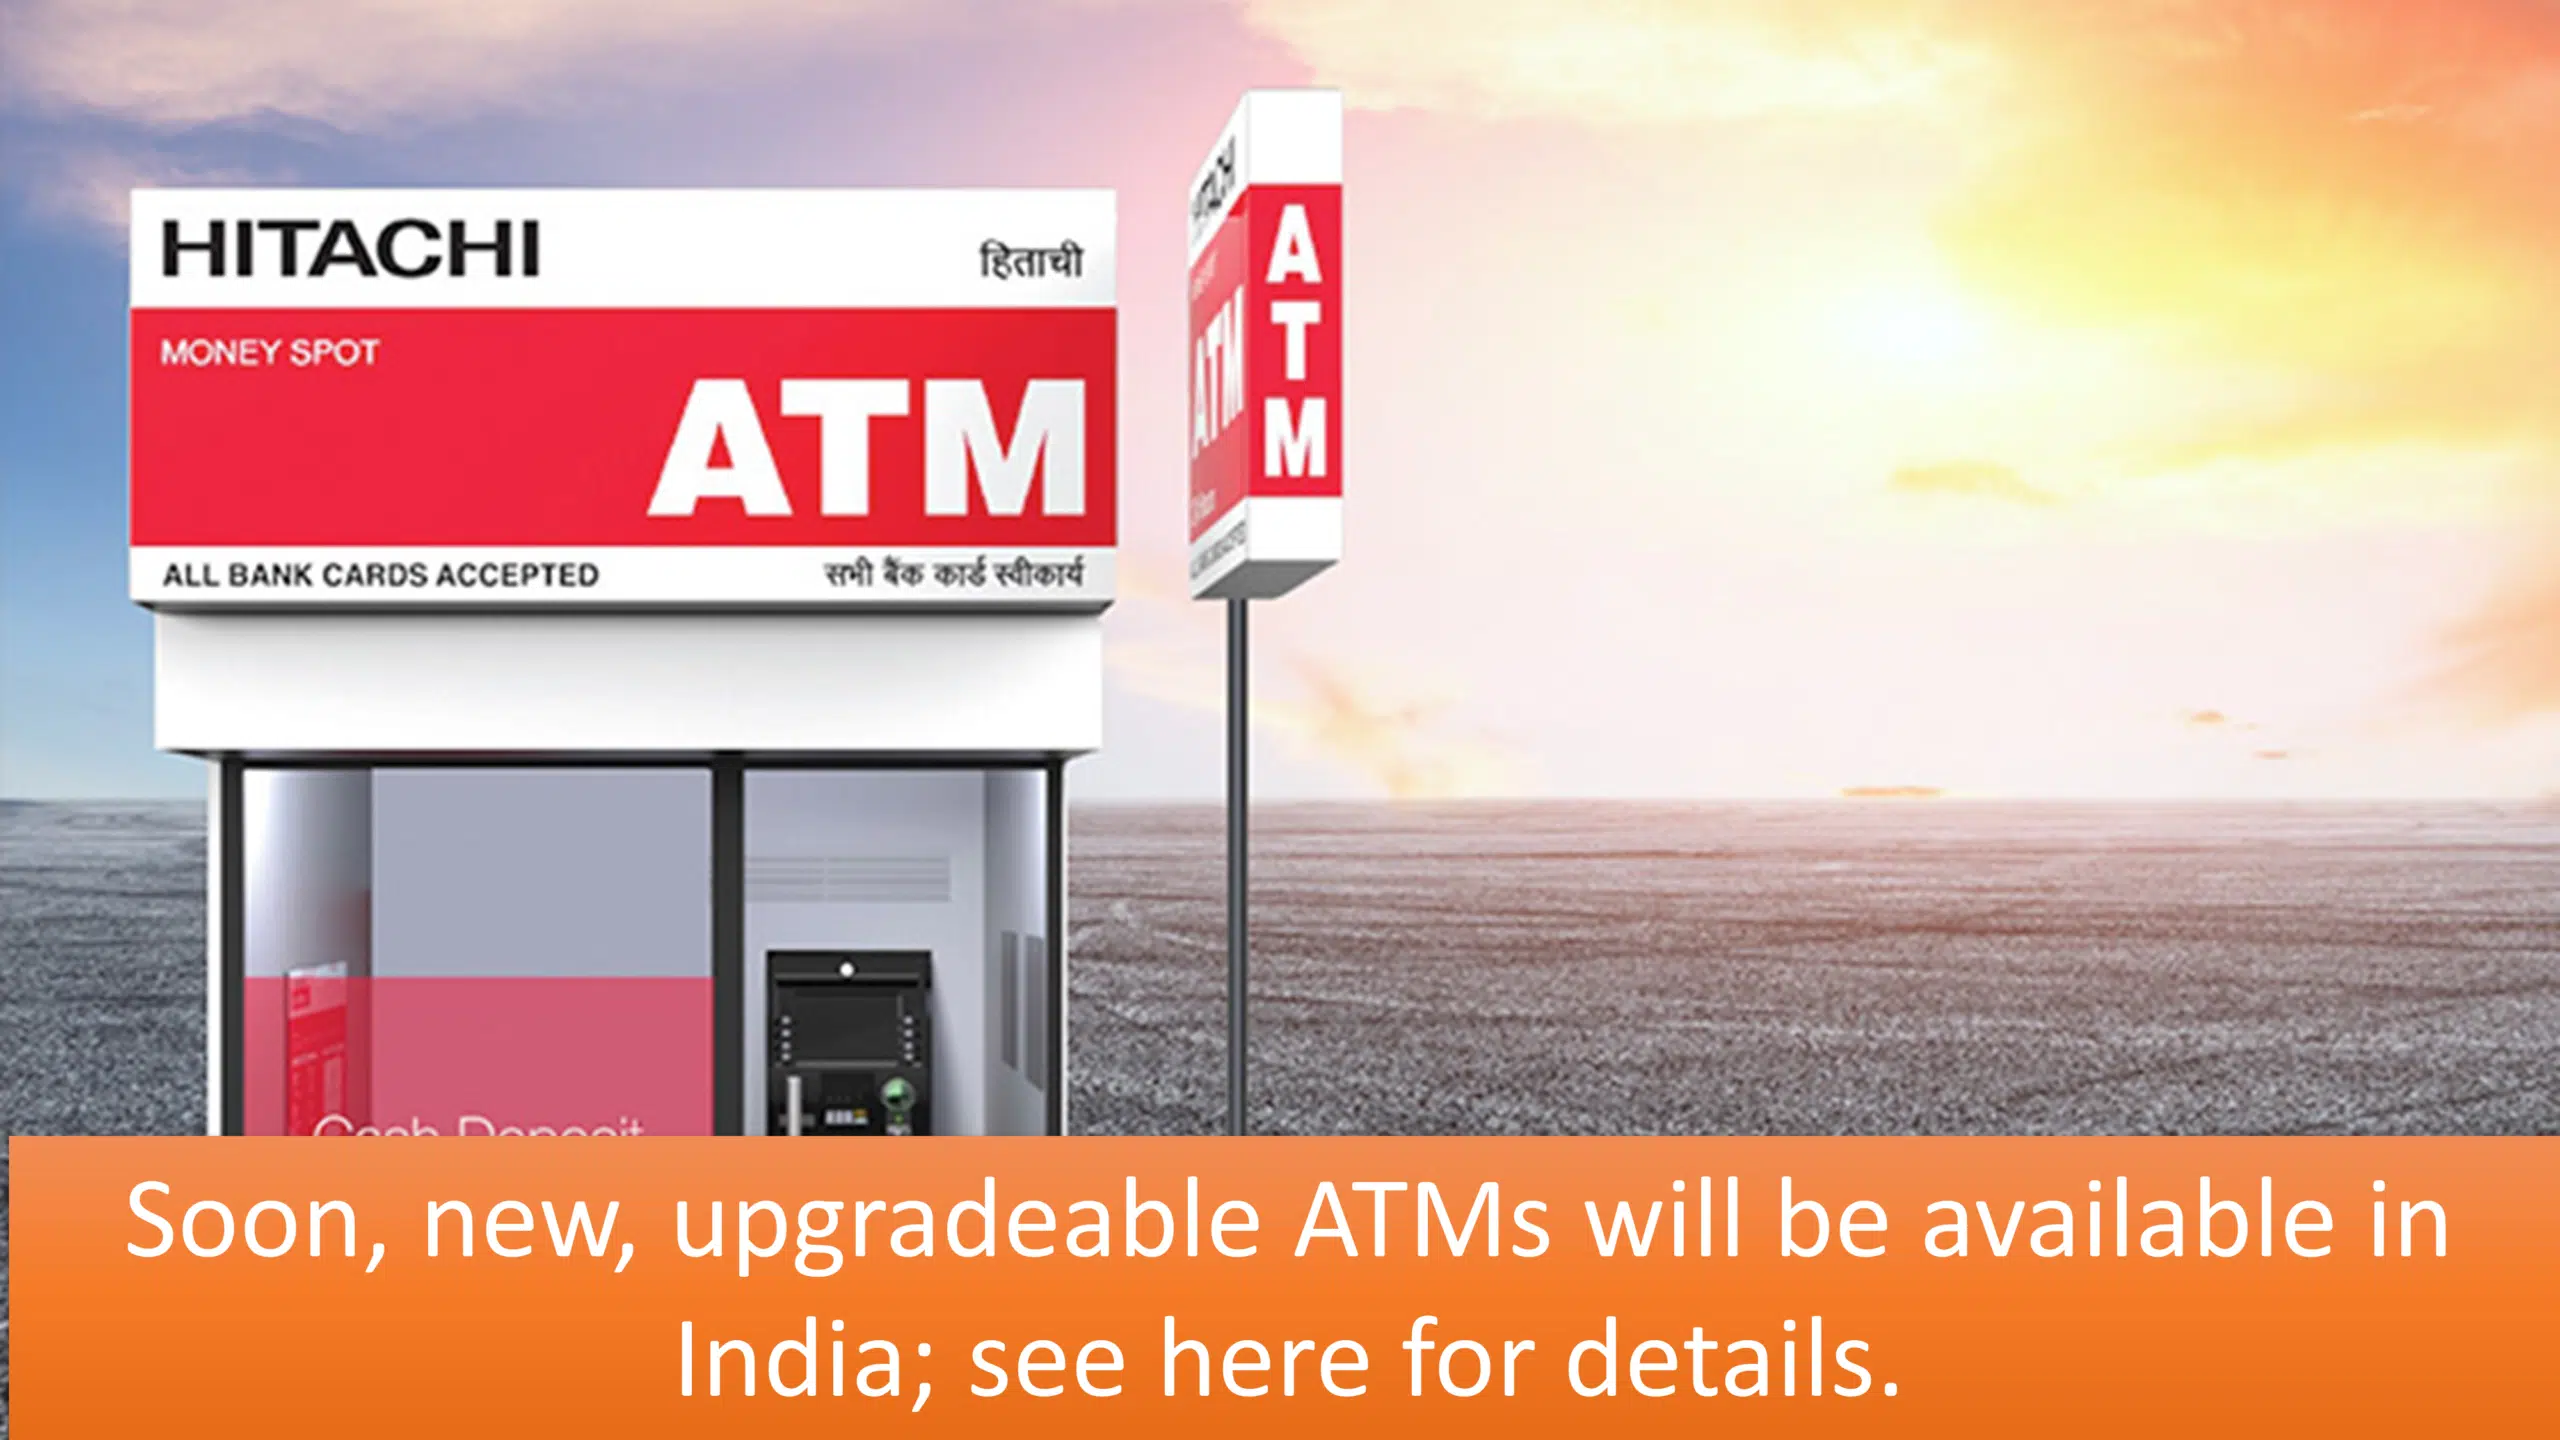 Soon, new, upgradeable ATMs will be available in India; see here for details.